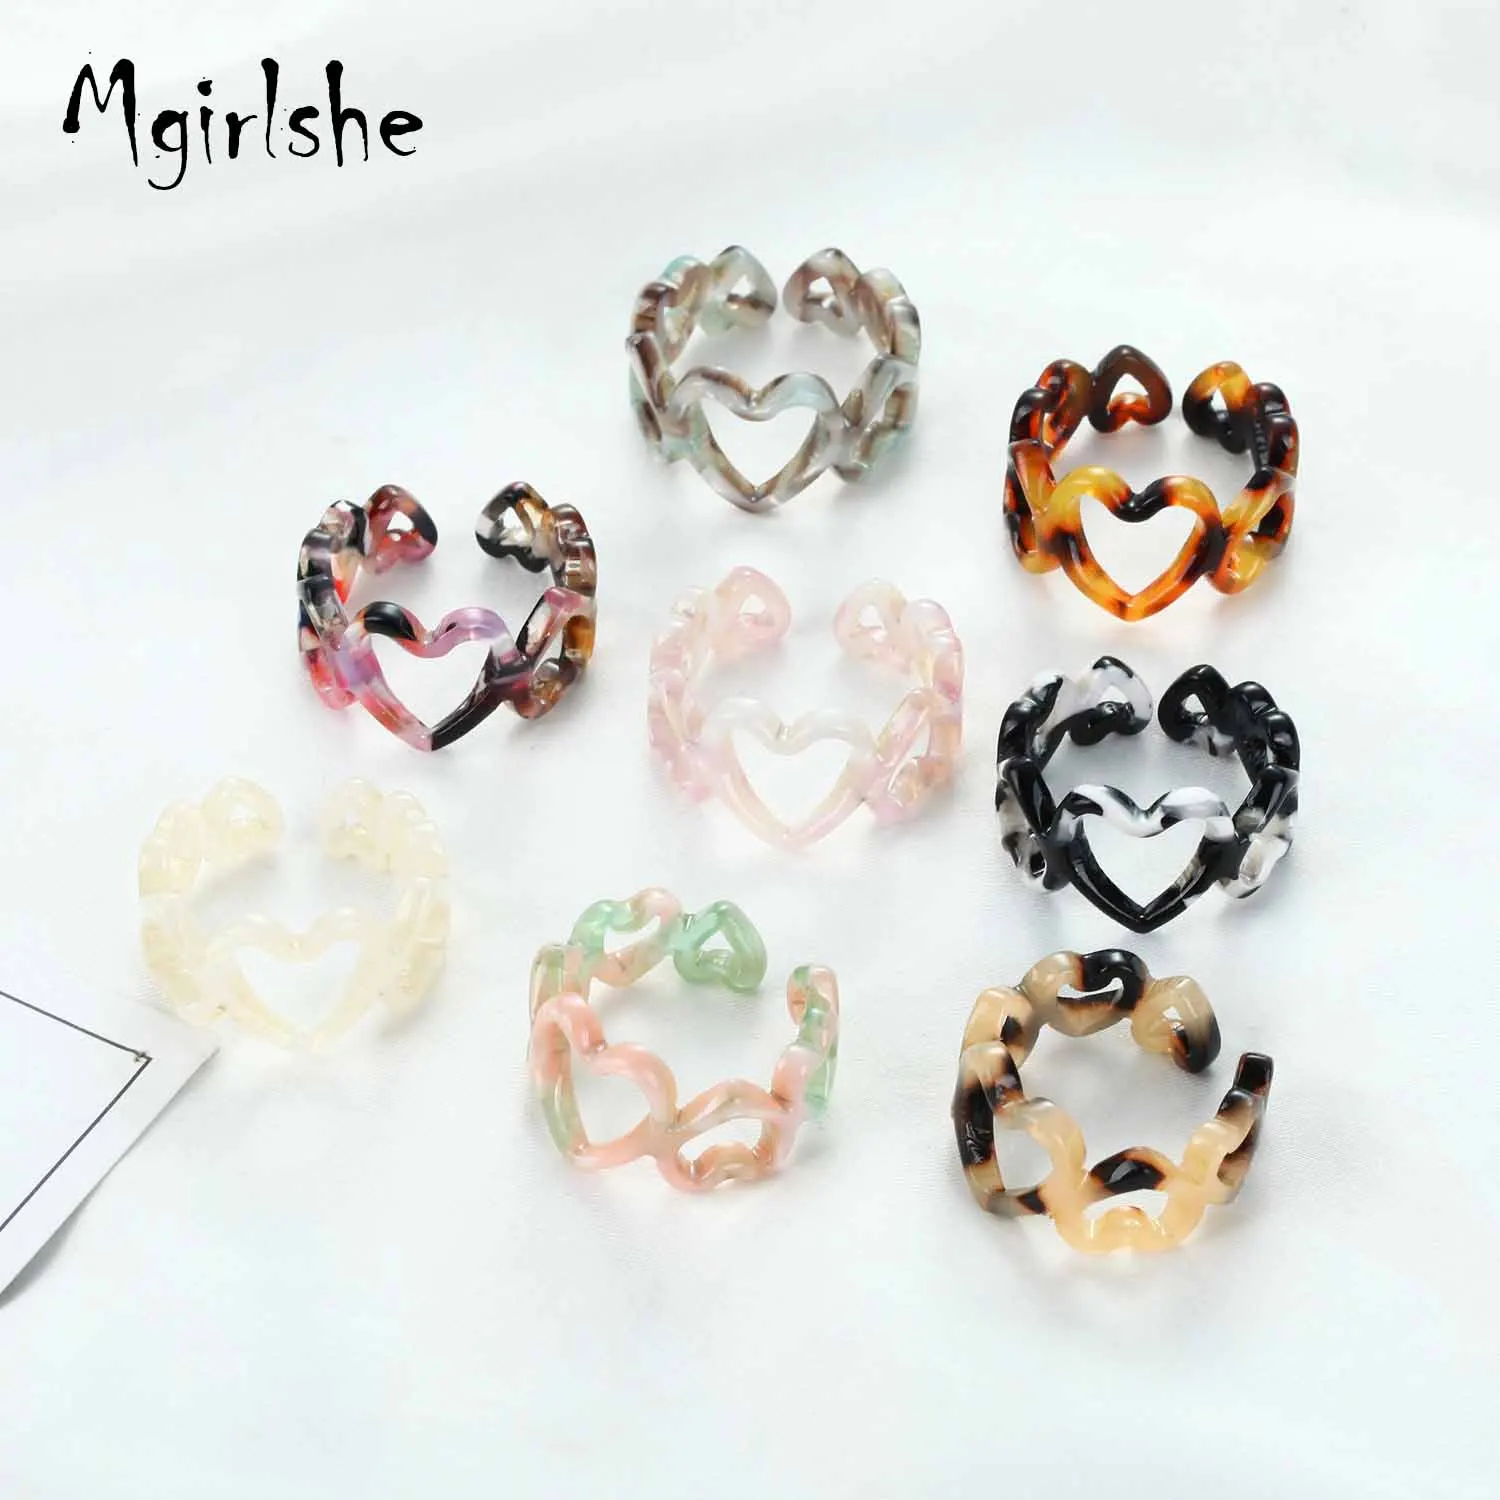 

Mgirlshe Europe and America Popular Heart Shaped Acrylic Acid Rings Adjustable Open Fashion Jewelry Ring for Women and Gilrs